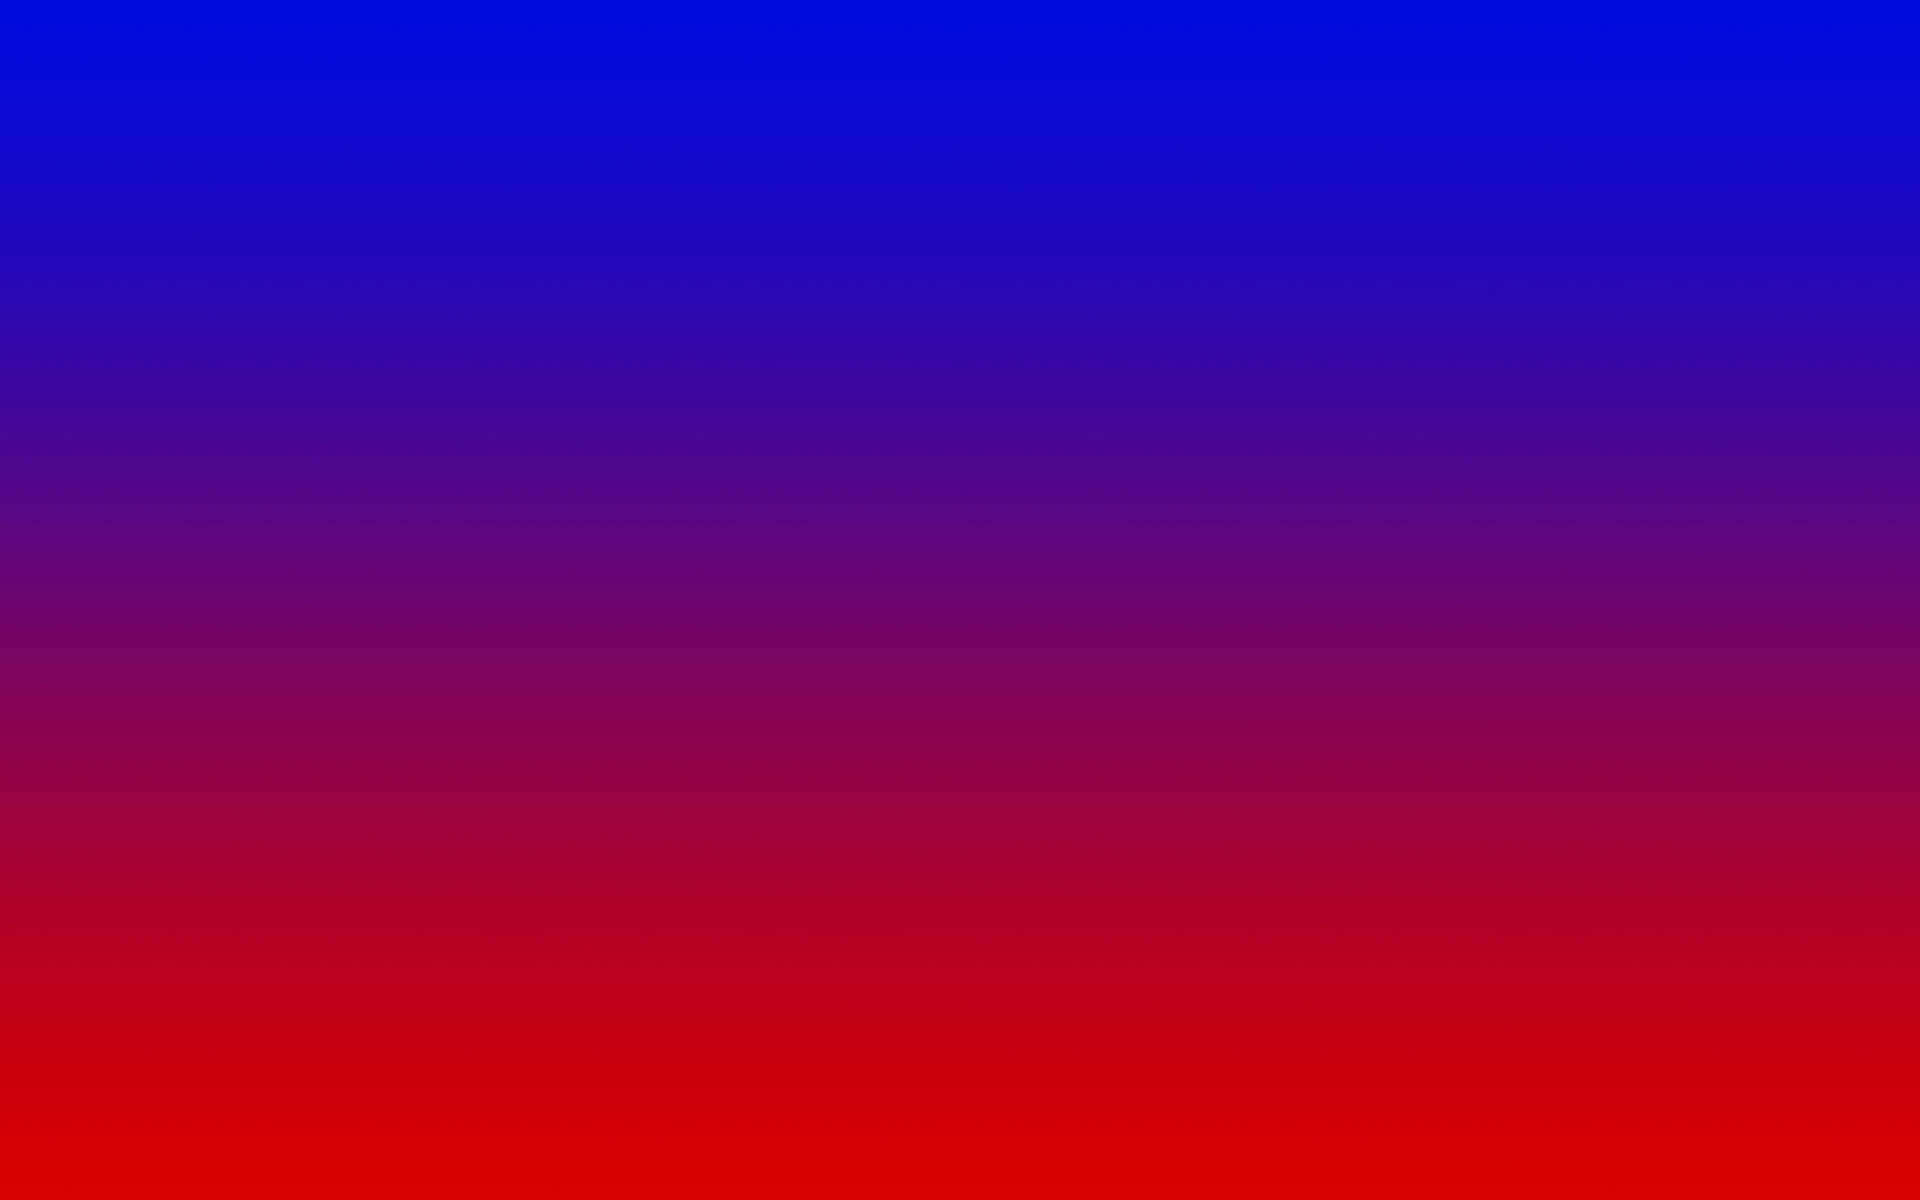 Abstraction of Blue and Red